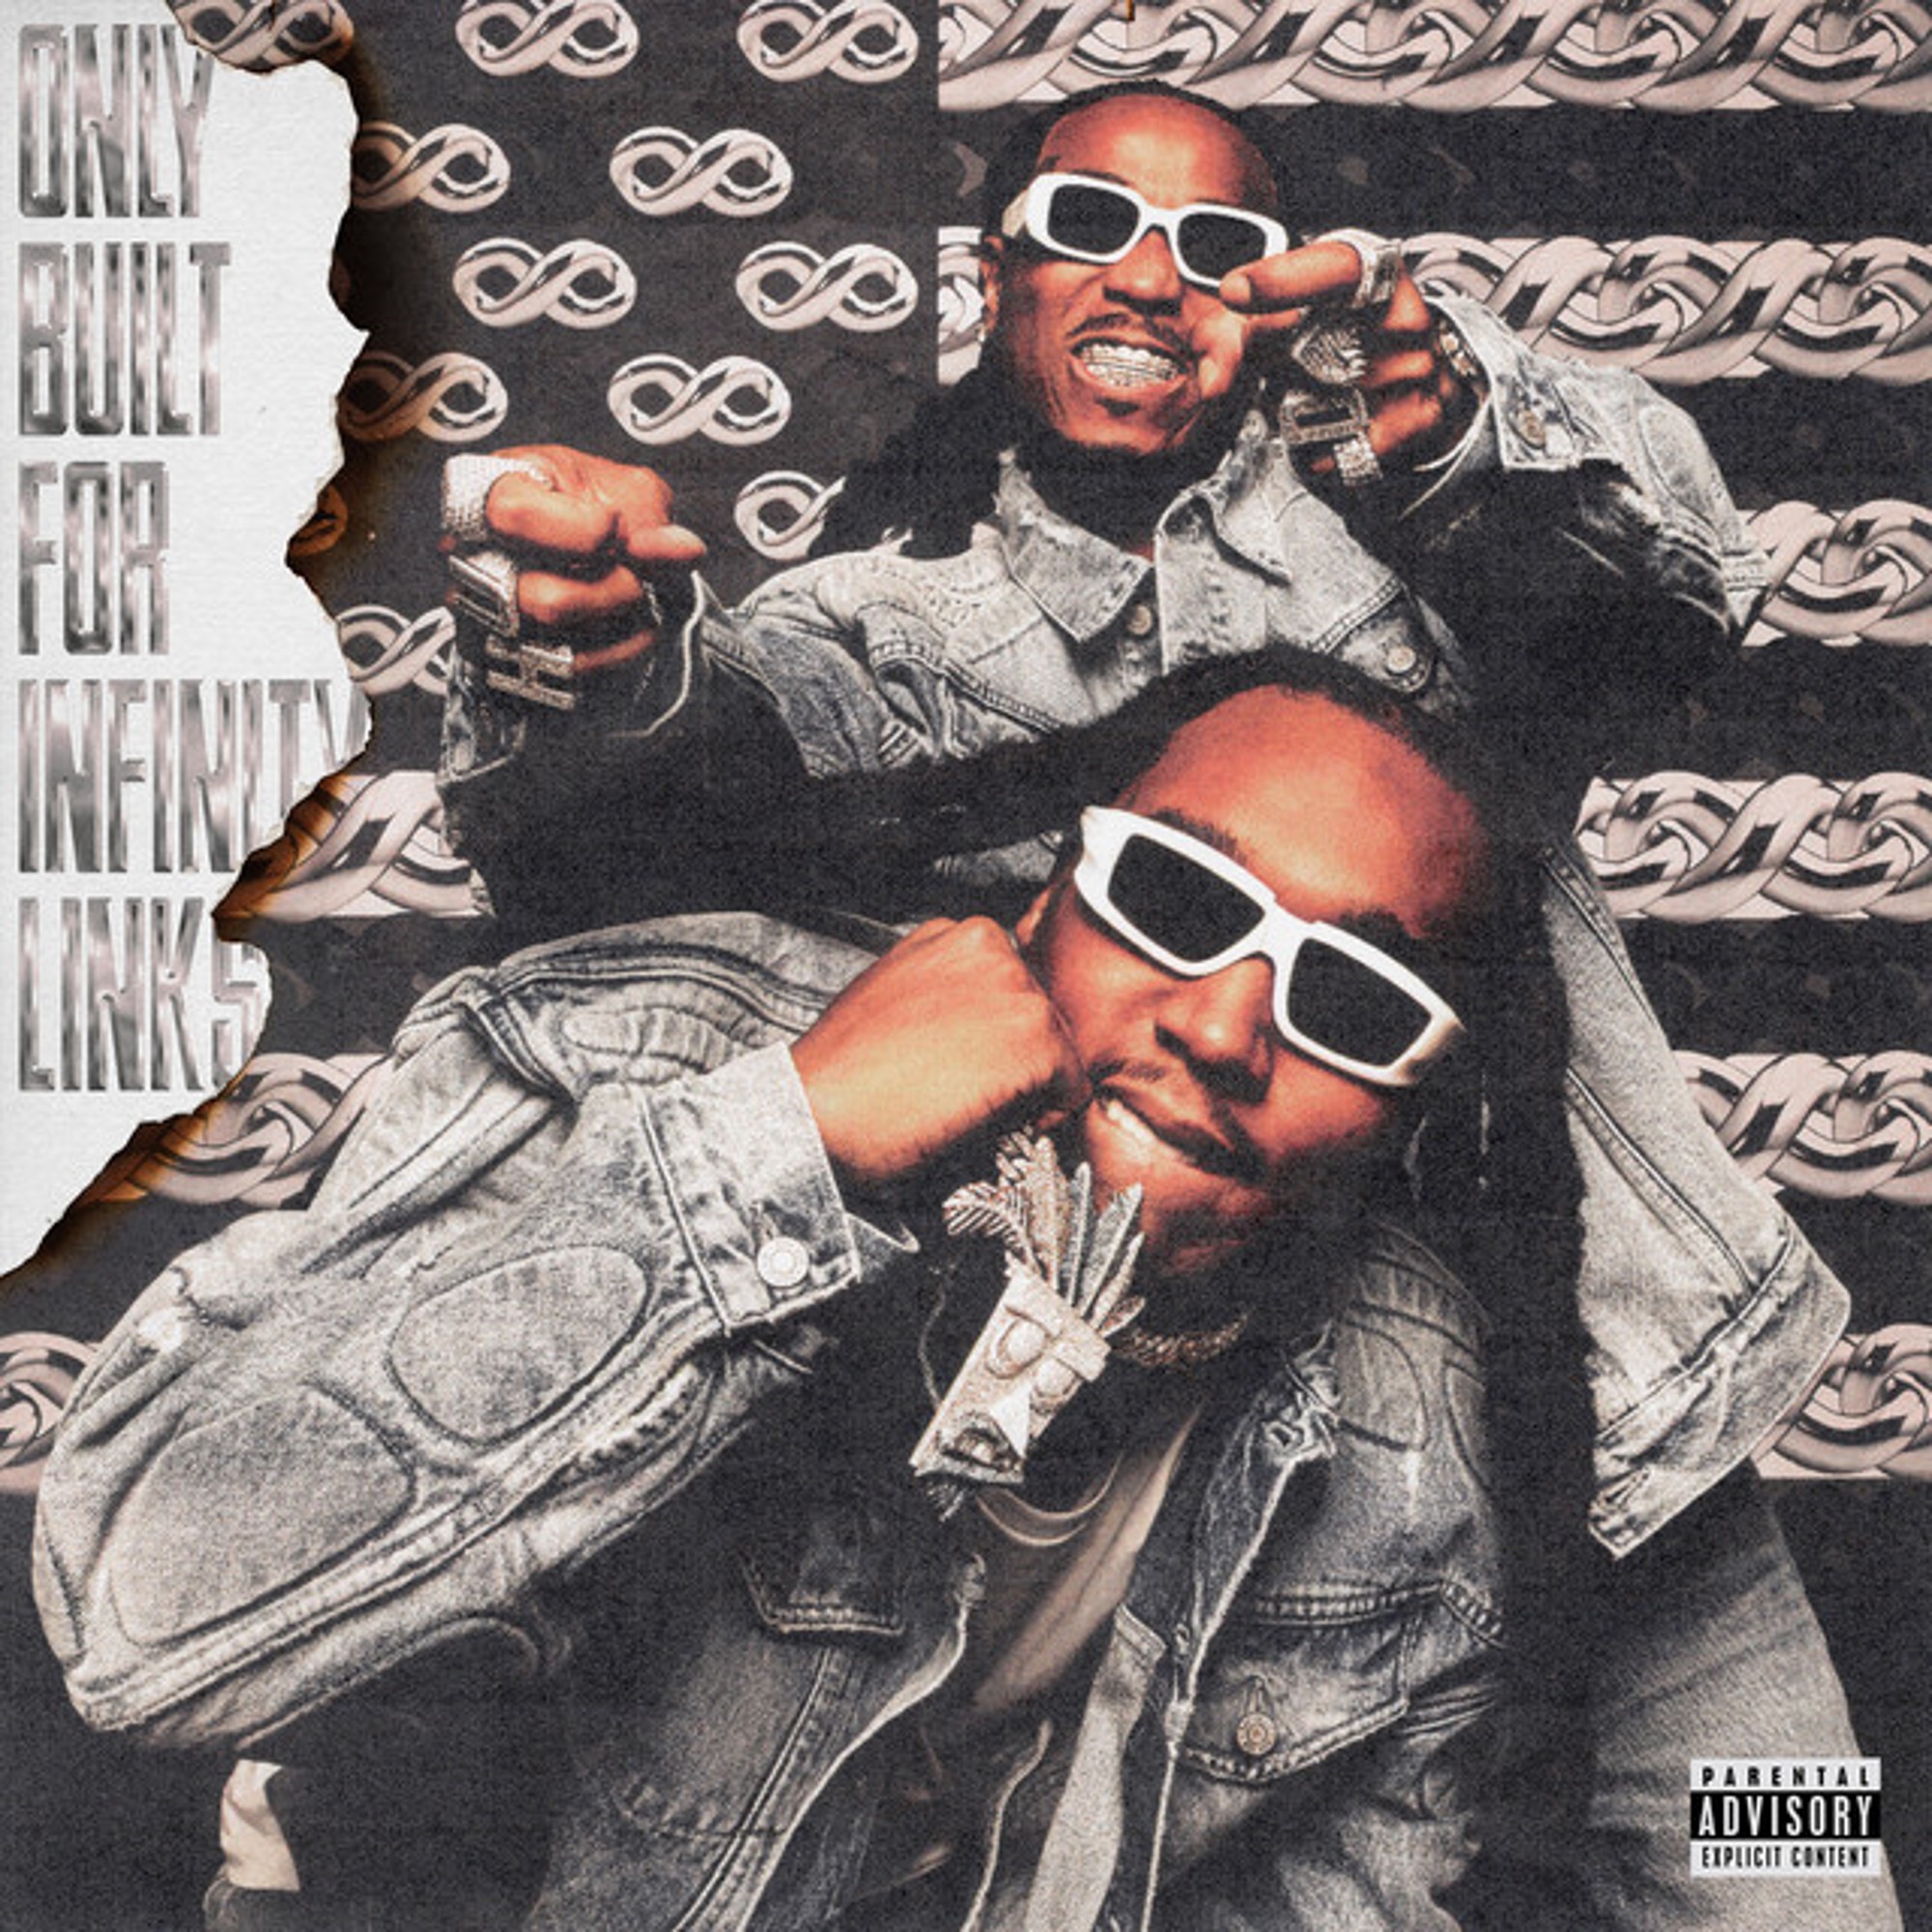 Quavo & Takeoff Only Built For Infinity Links cover artwork